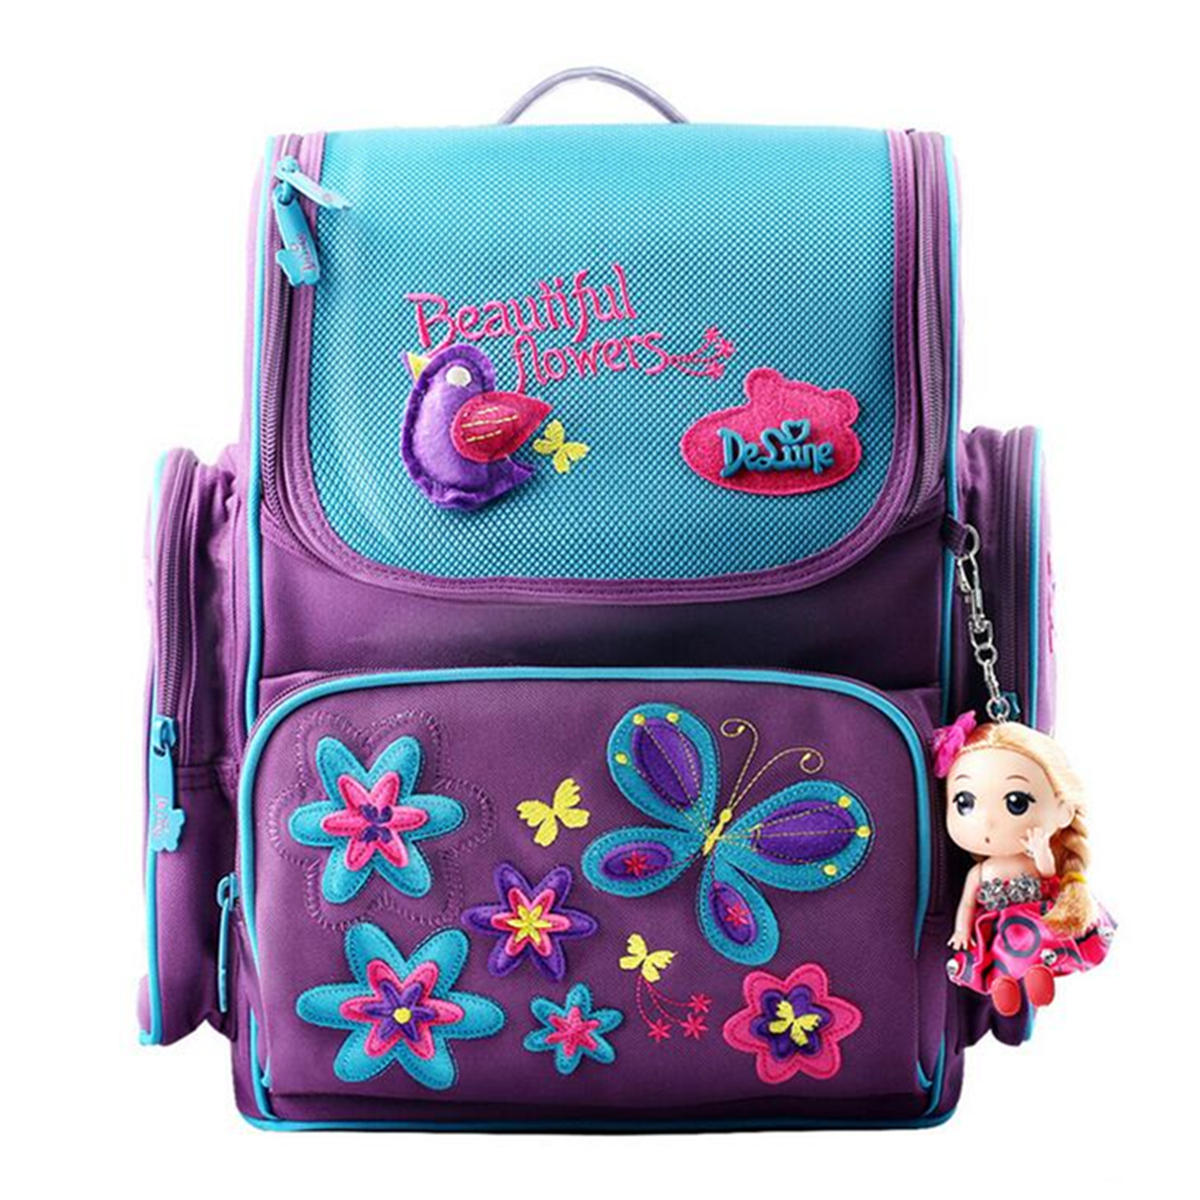 18L Girls Kids Cartoon School Bag Reflective Safety Waterproof Children Backpack With Doll Pendant 